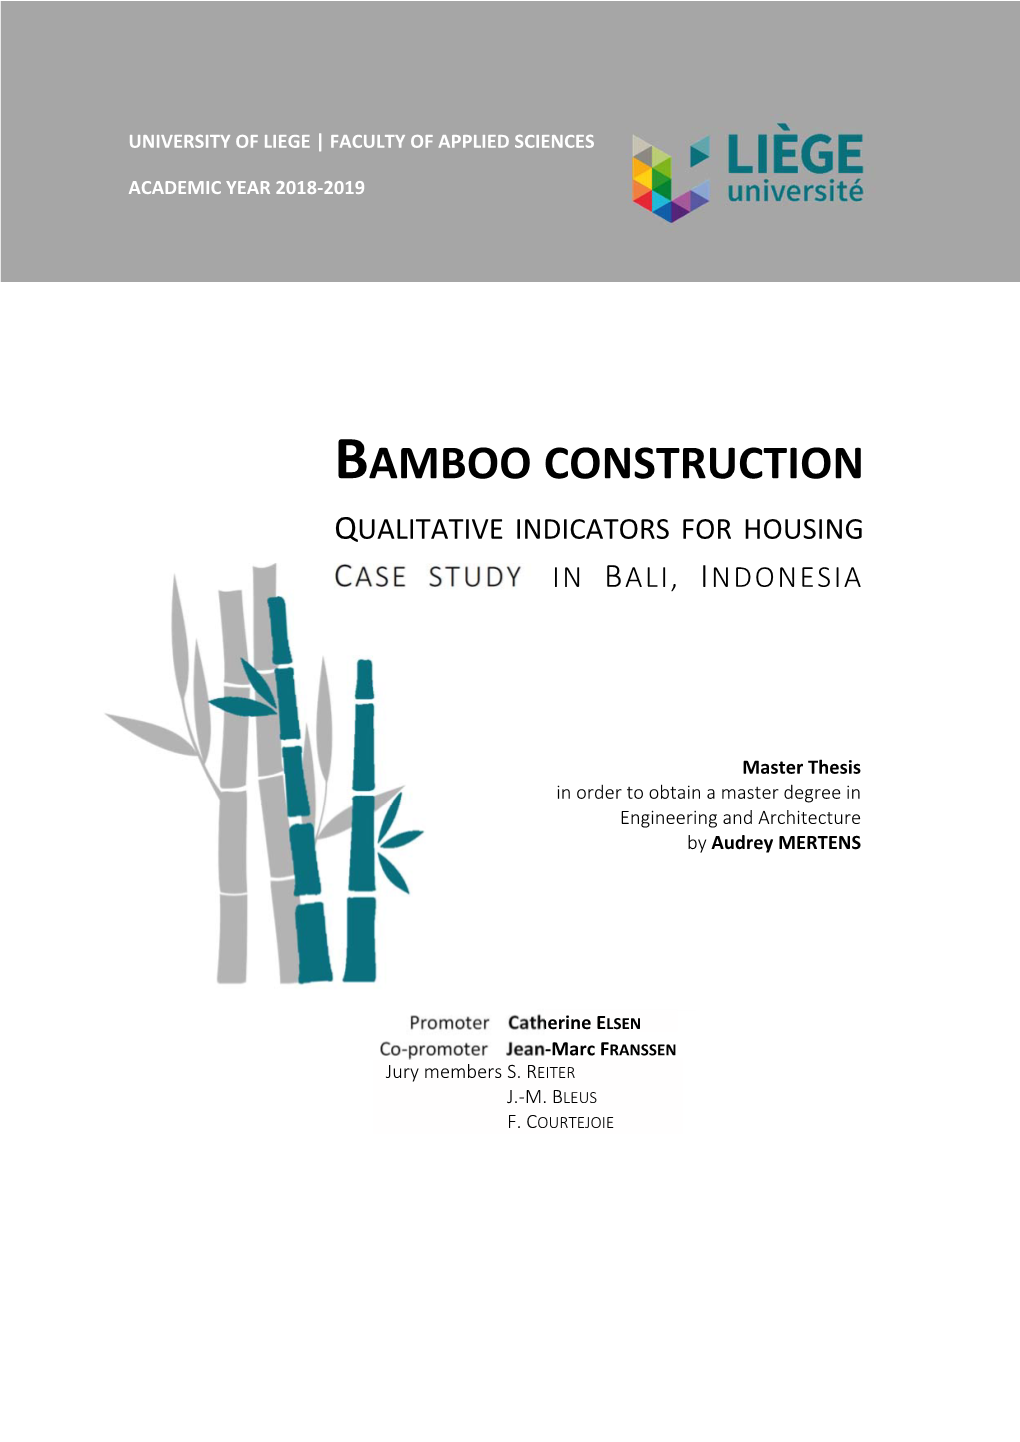 Bamboo Construction Qualitative Indicators for Housing Case Study in Bali, Indonesia